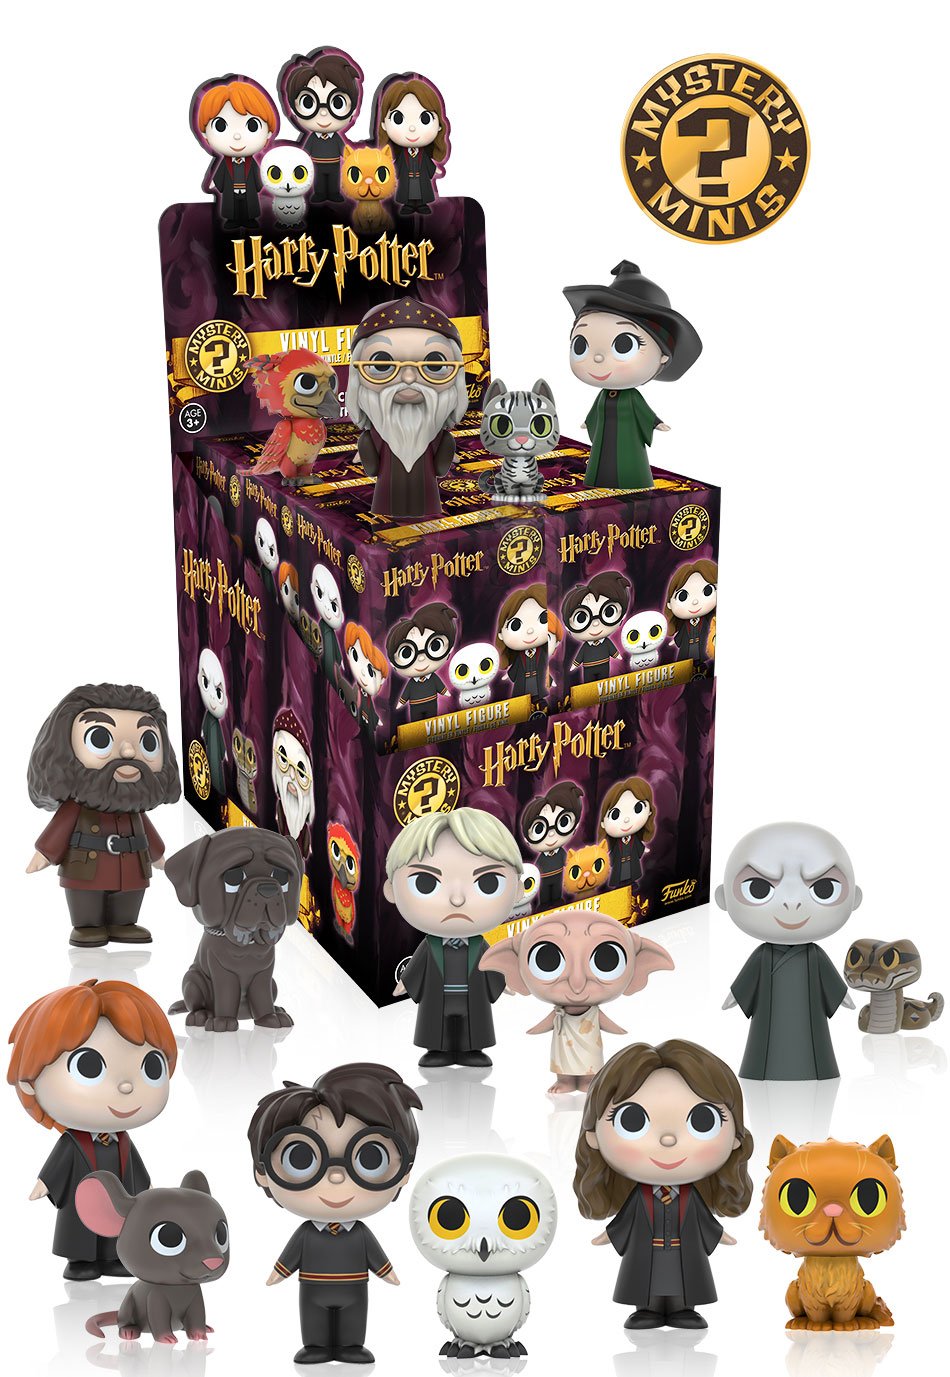 Head Back to Hogwarts with Harry Potter Mystery Minis!